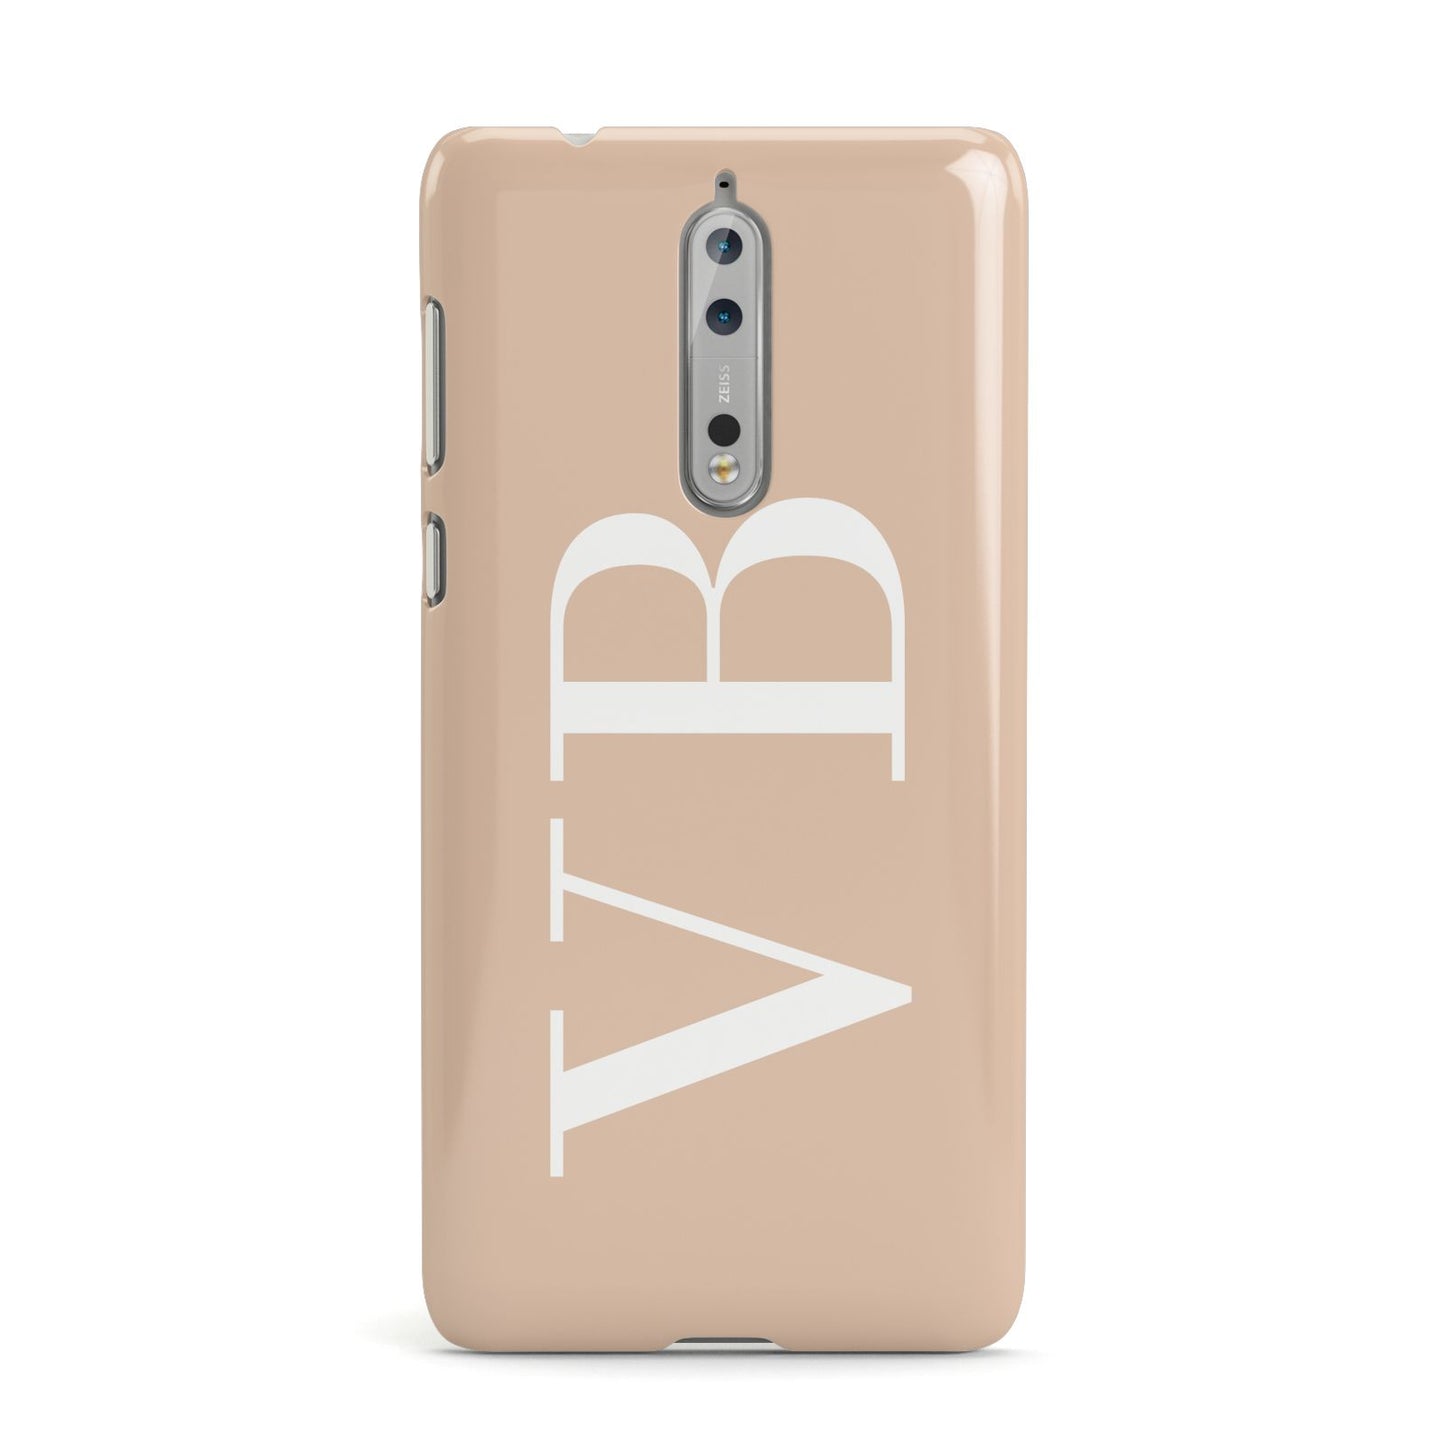 Nude And White Personalised Nokia Case